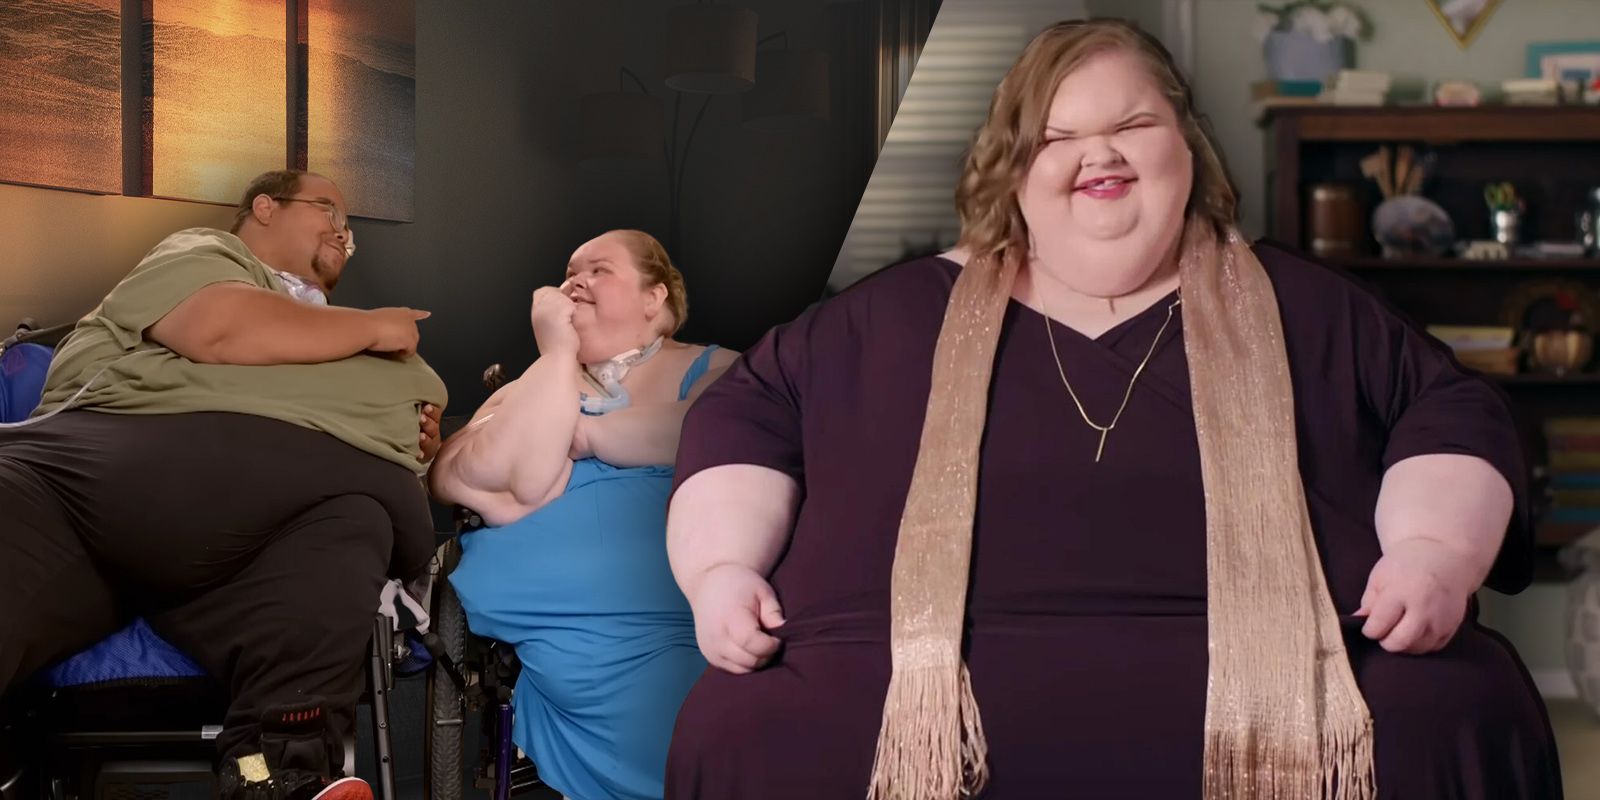 Tammy Slaton and Caleb Willingham from 1000-lb Sisters